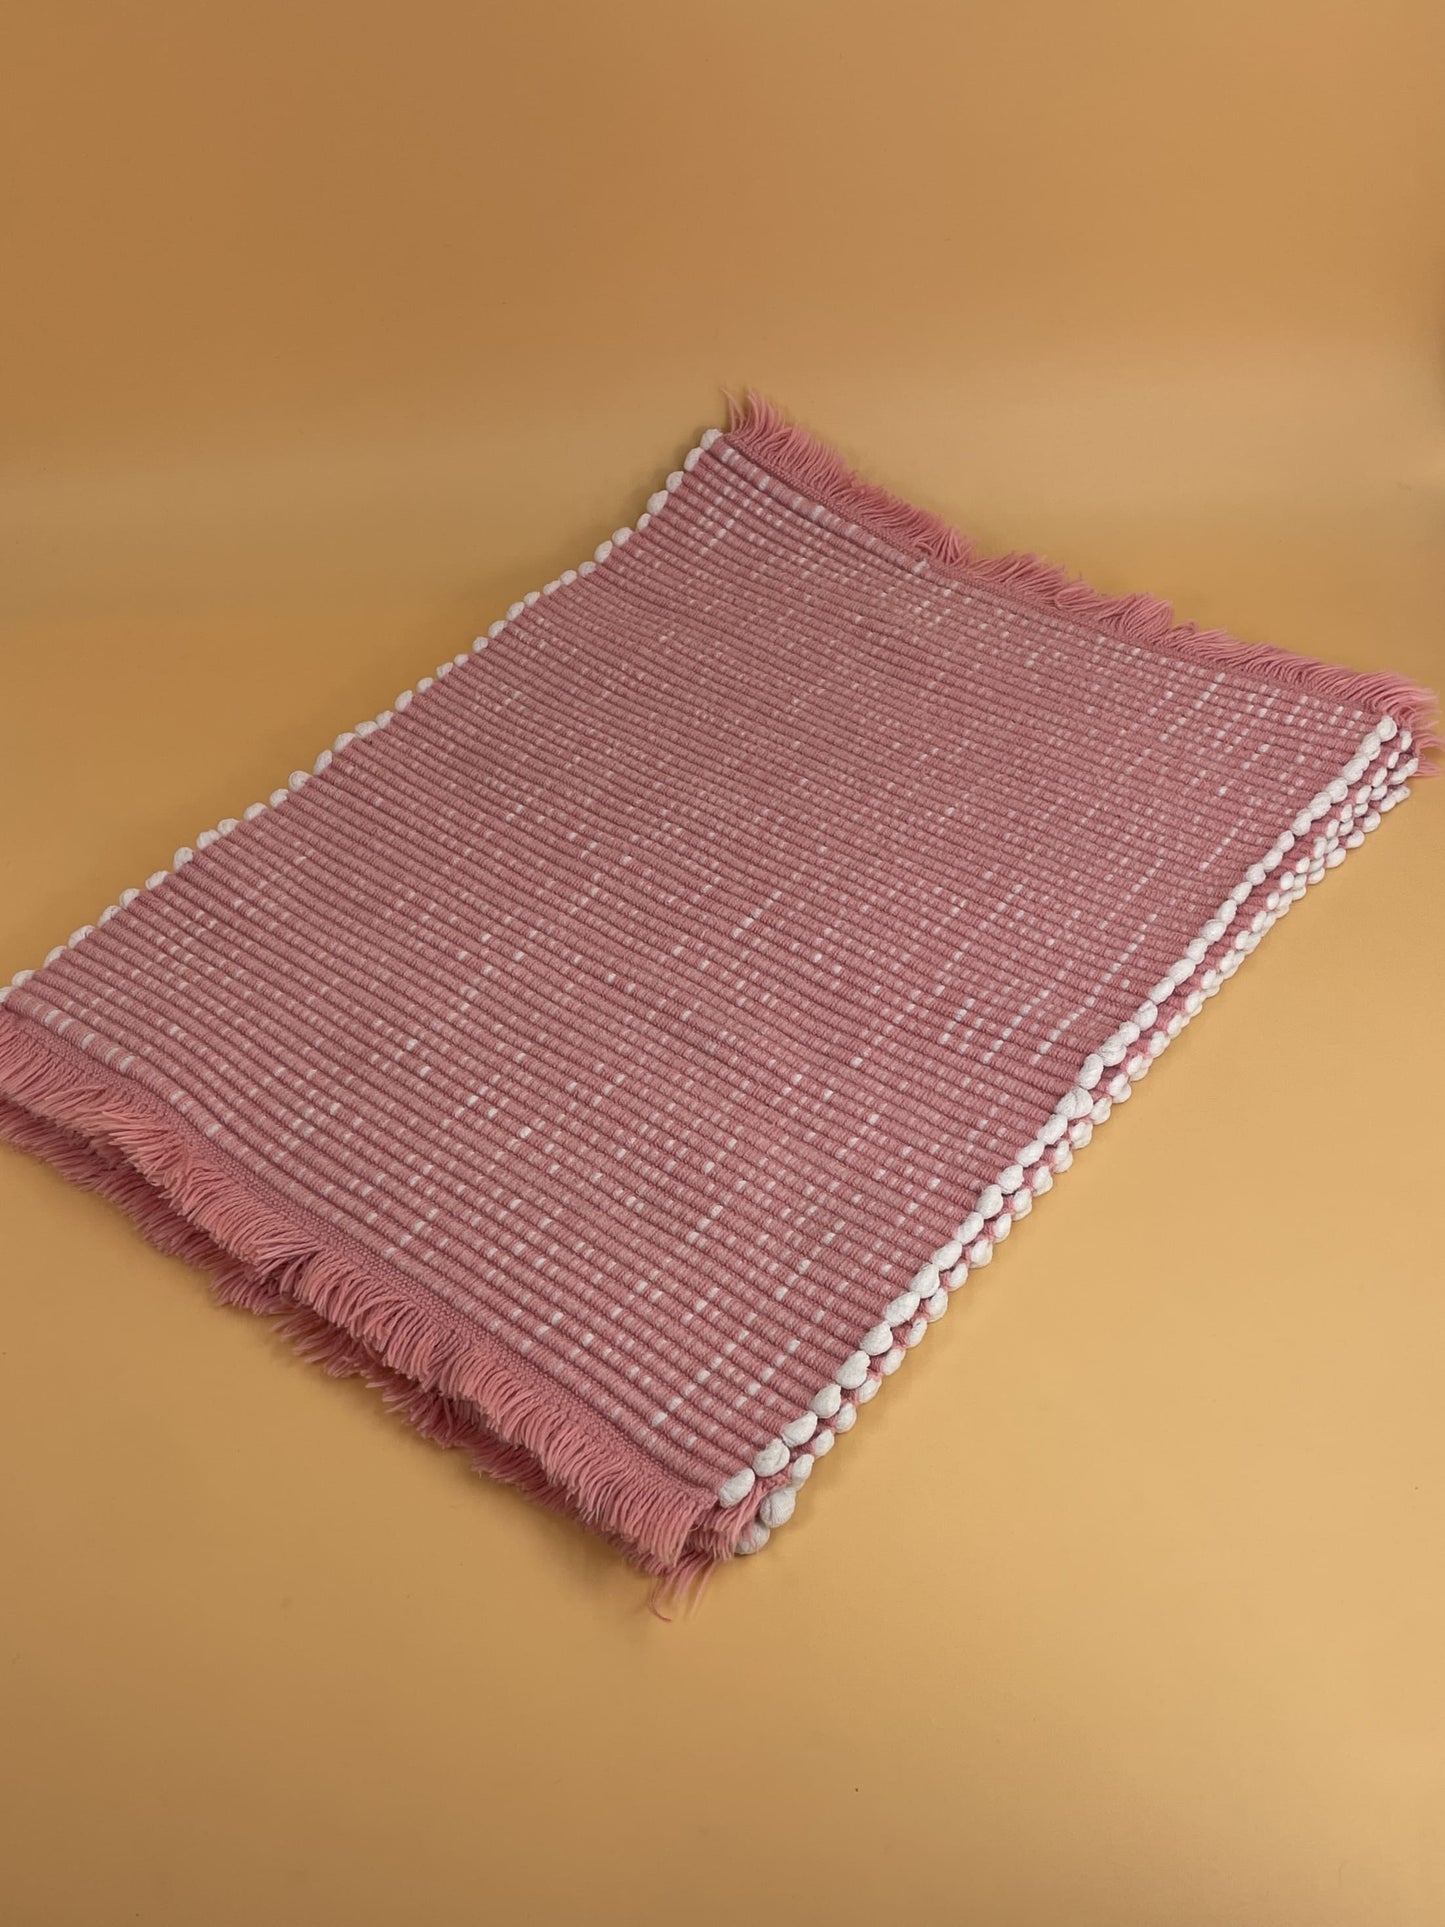 Vintage Pink Woven Placemats (Set of 4)